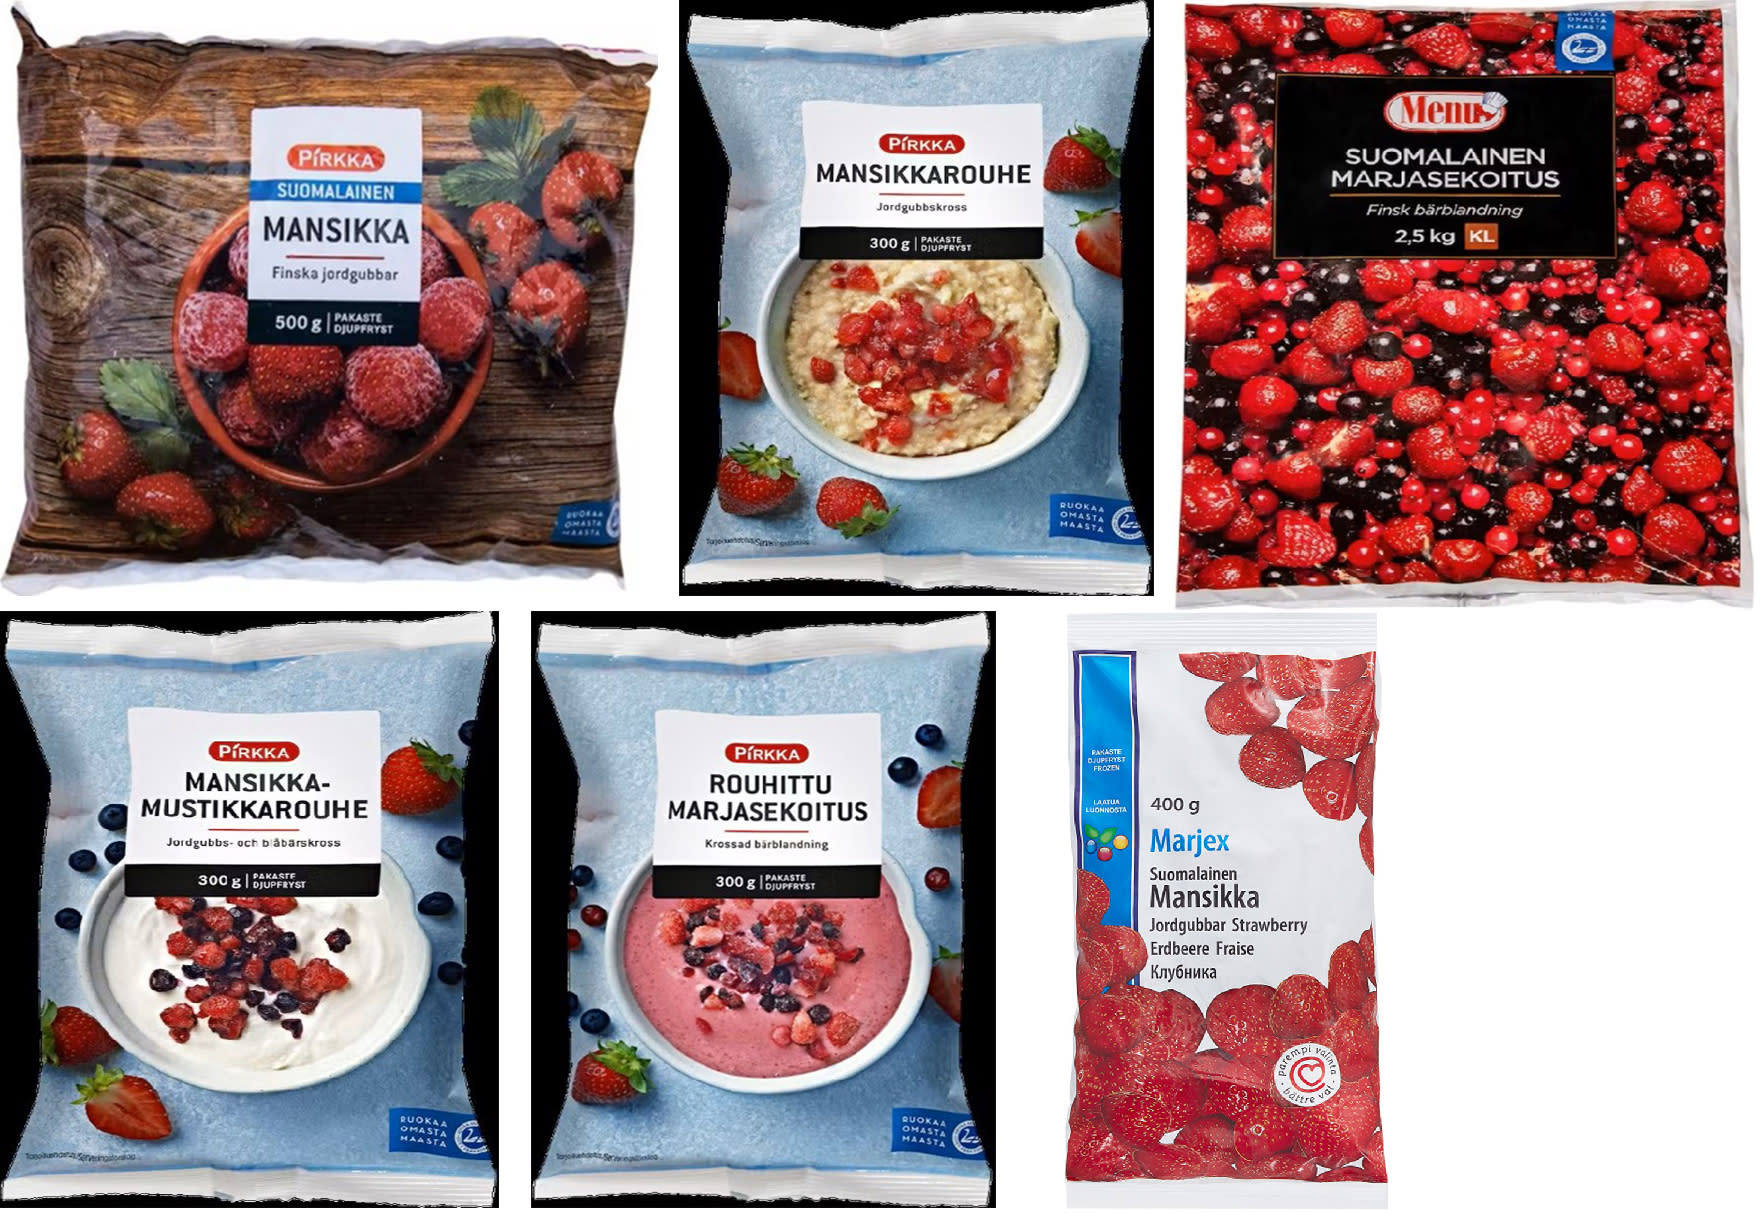 Food Authority warns of plastic risk in frozen berry packages